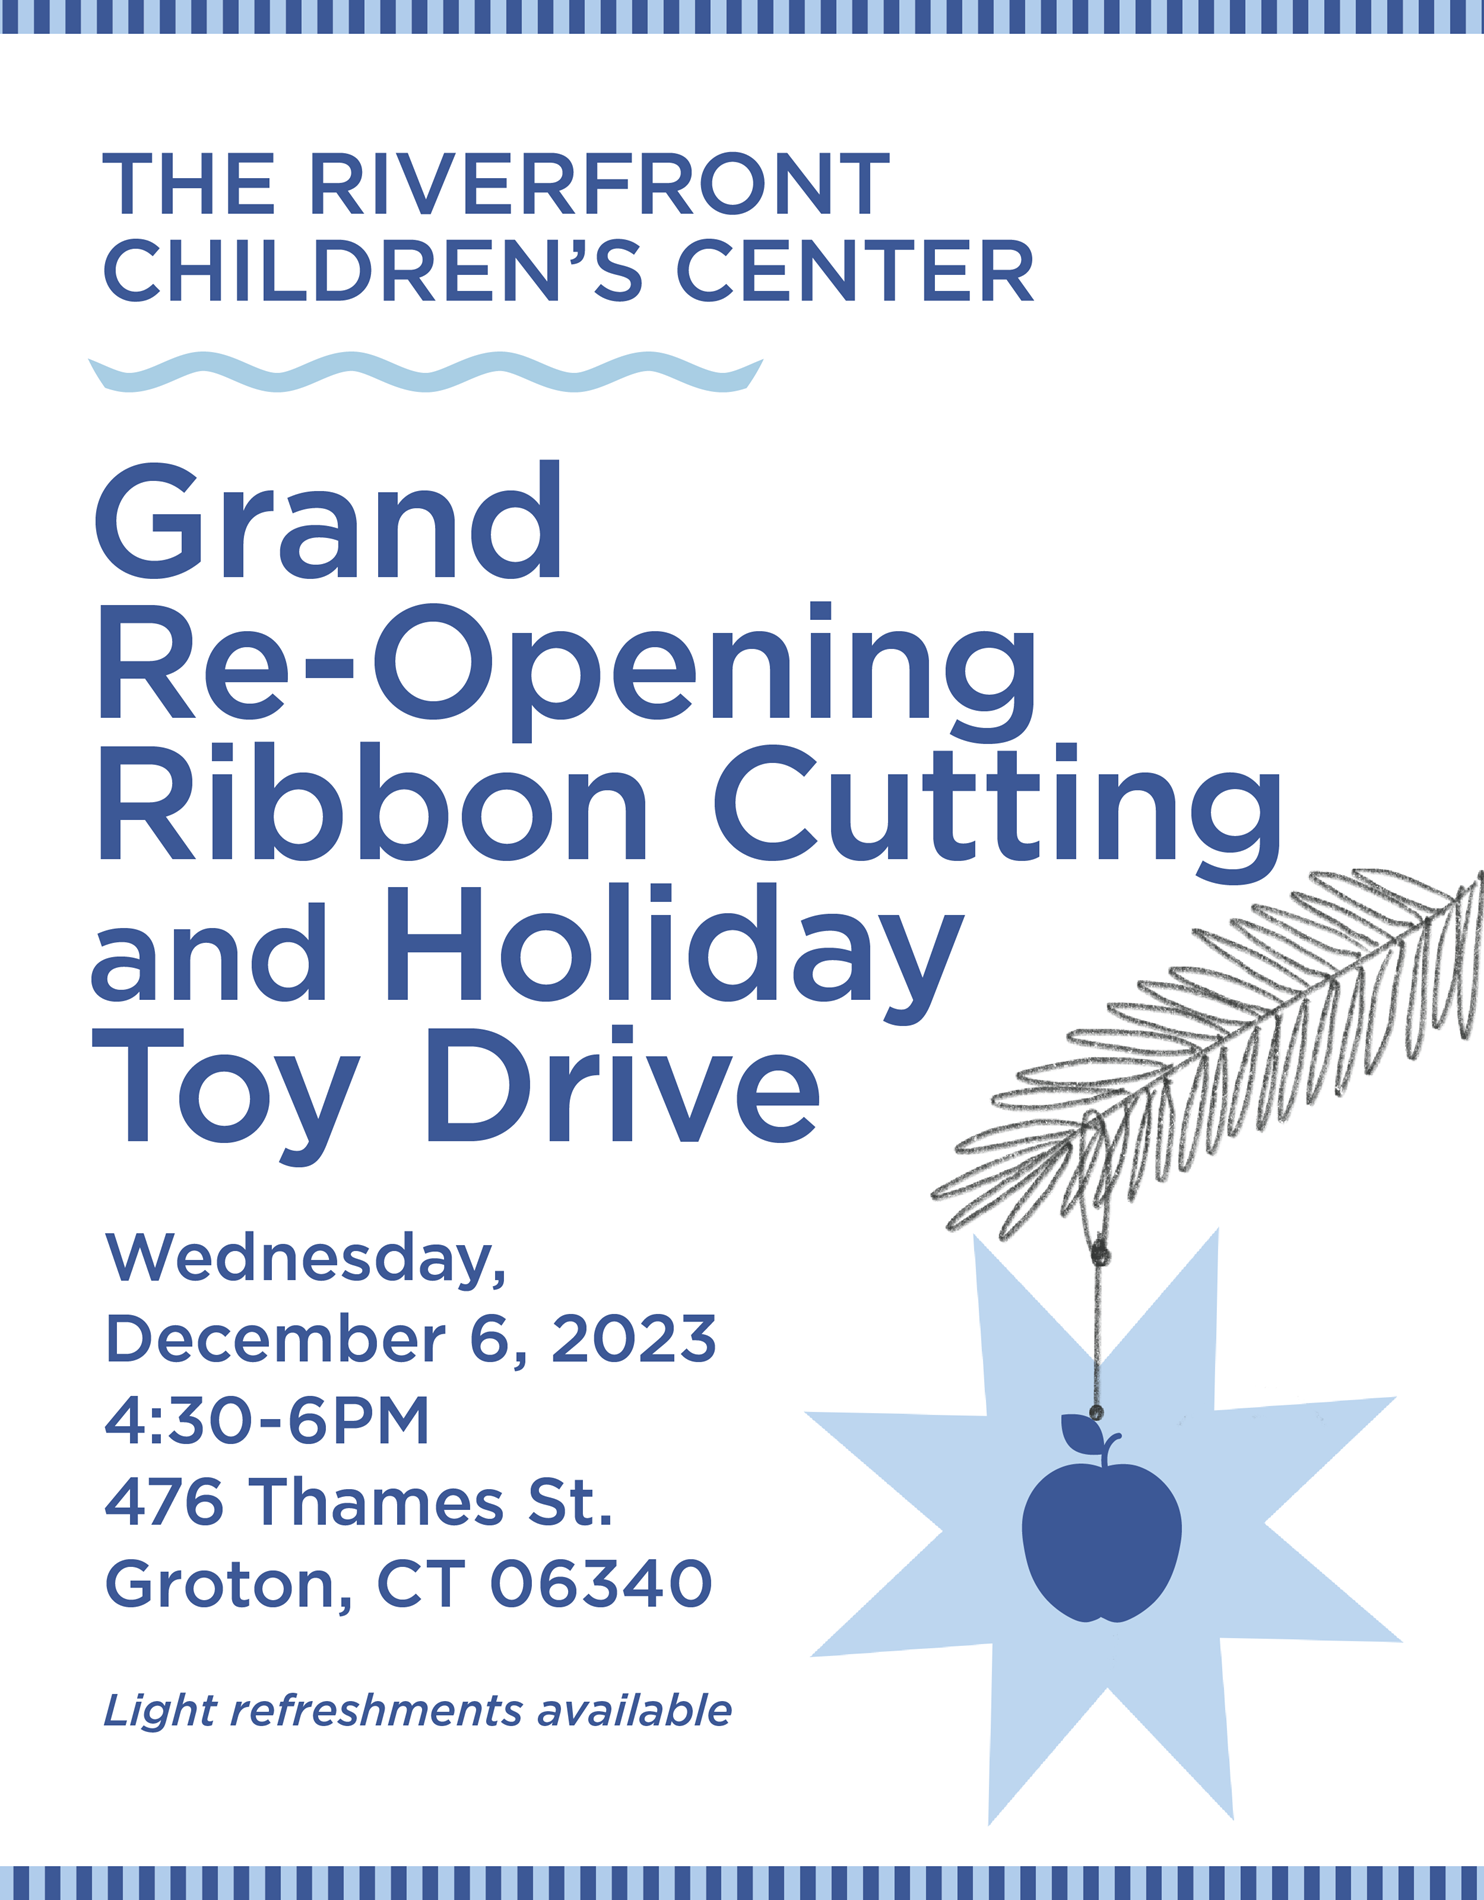 THE RIVERFRONT CHILDREN'S CENTER Grand Re-Opening Ribbon Cutting and Holiday Toy Drive Wednesday, December 6, 2023 4:30-6PM 476 Thames St. St. Groton, CT 06340 Light refreshments available. Free to the public. Come see what makes Riverfront a great place for working families!